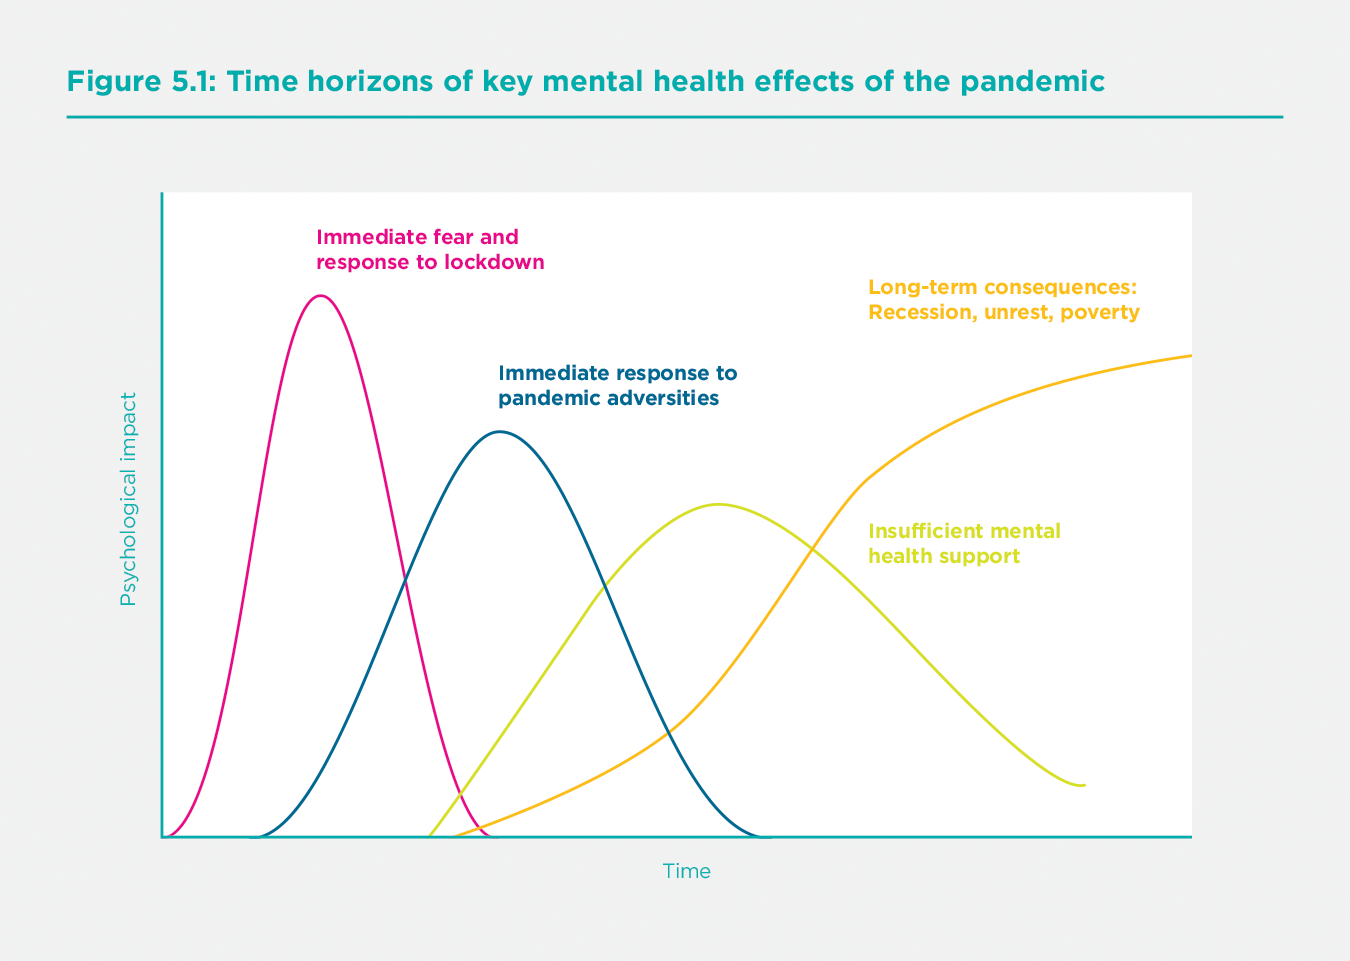 Figure 5.1 Time horizons of key mental health effects of the pandemic